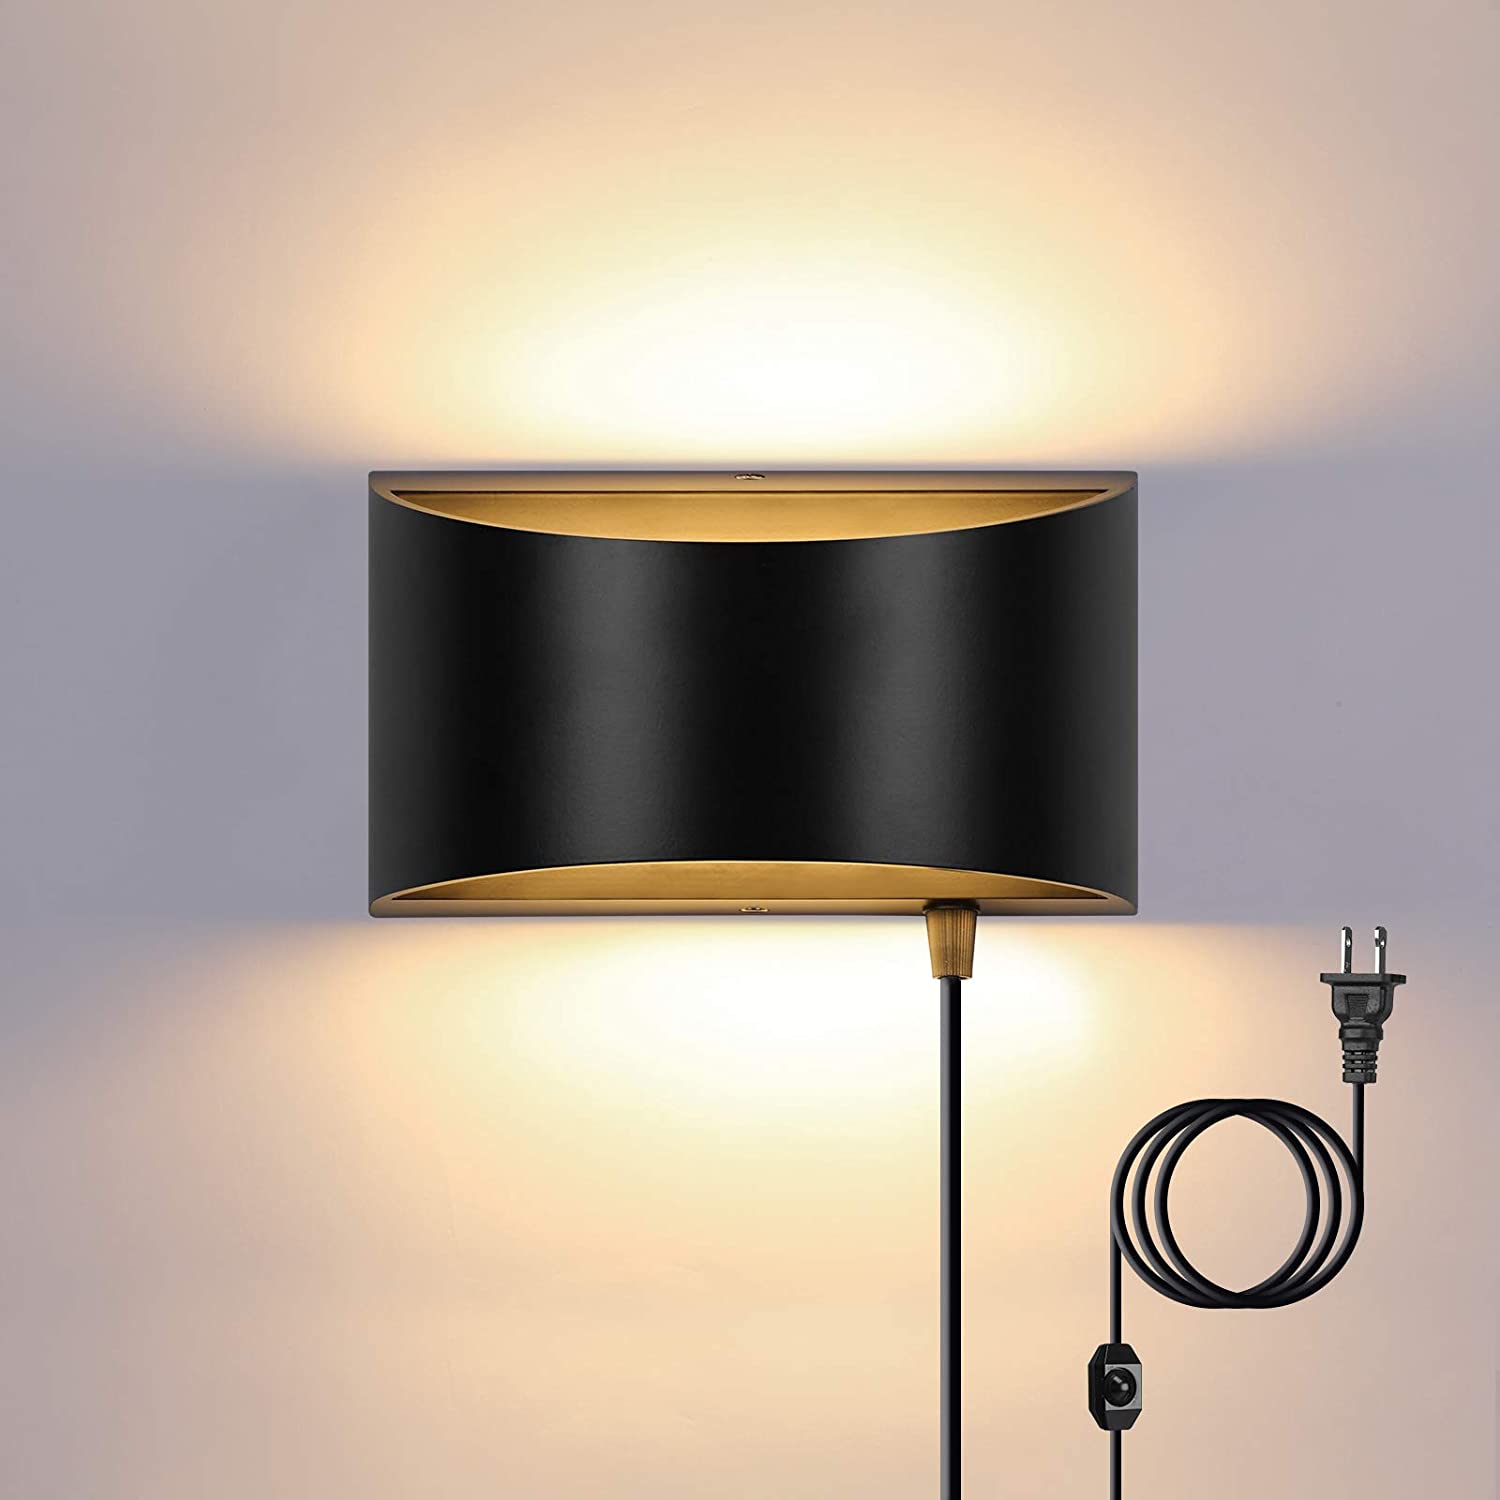 Details about  / Wall Sconce 2 Light Wall Mount Leaf Hall Entry Living Dining Lights Lighting